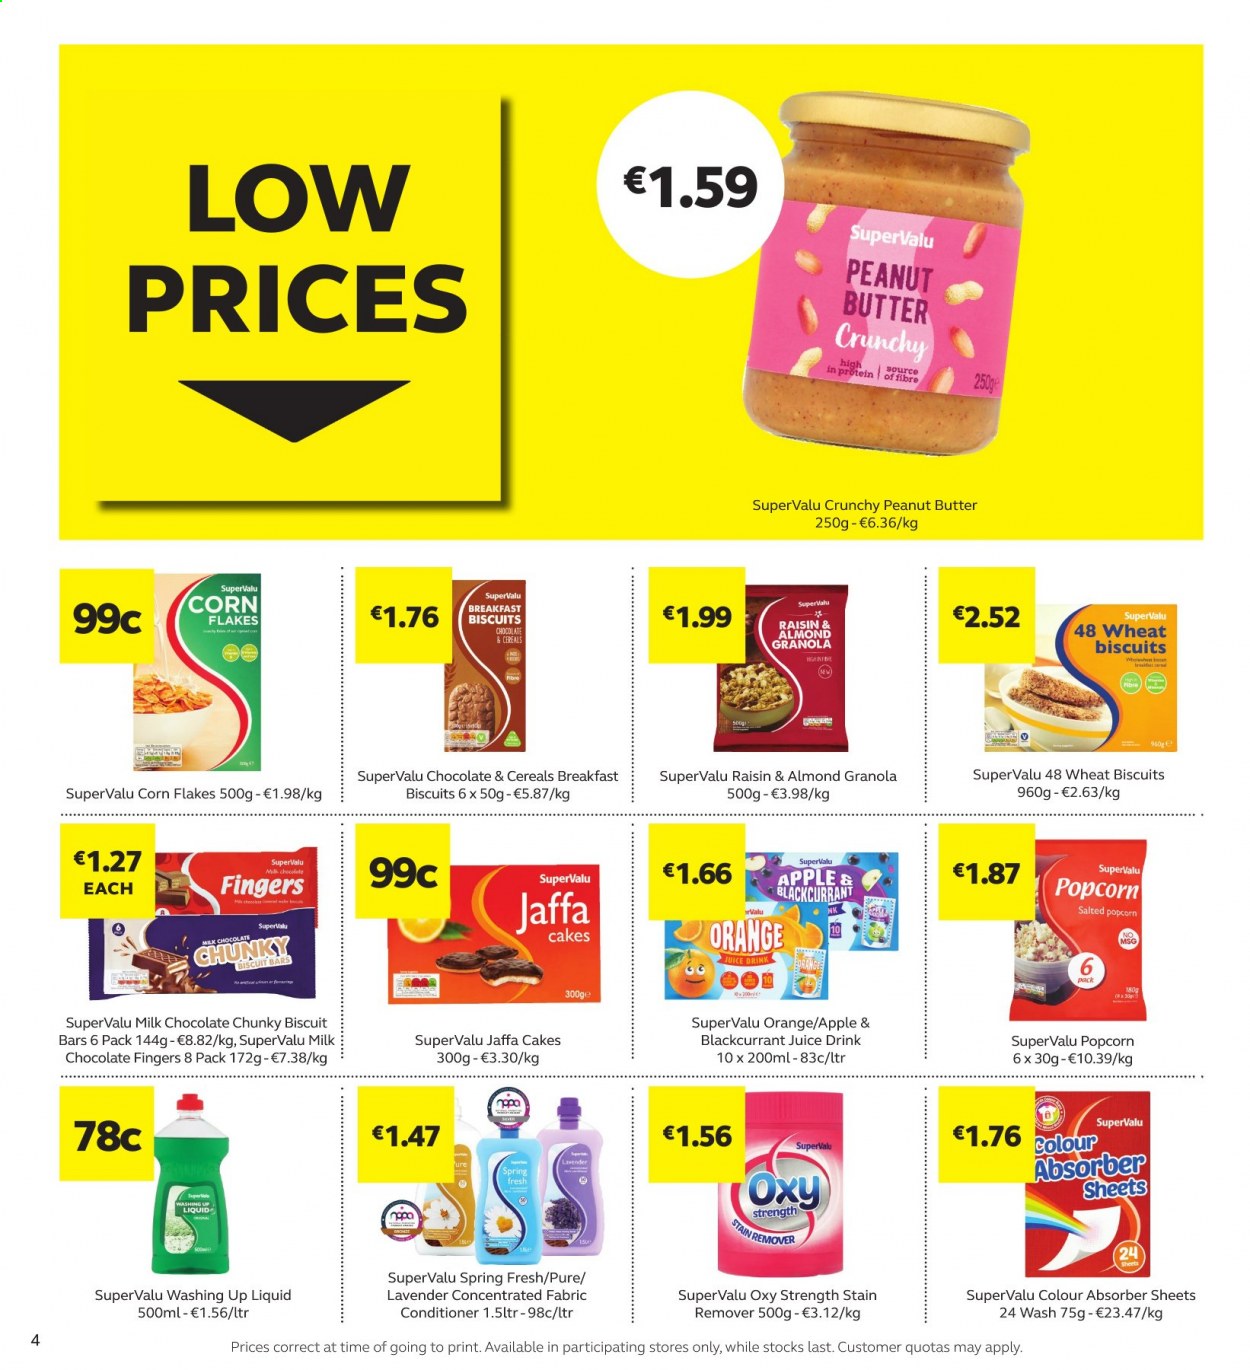 thumbnail - SuperValu offer  - 21.01.2021 - 03.02.2021 - Sales products - cake, oranges, milk chocolate, chocolate, biscuit, popcorn, cereals, granola, corn flakes, peanut butter, almonds, raisins, juice, stain remover, dishwashing liquid, conditioner. Page 4.